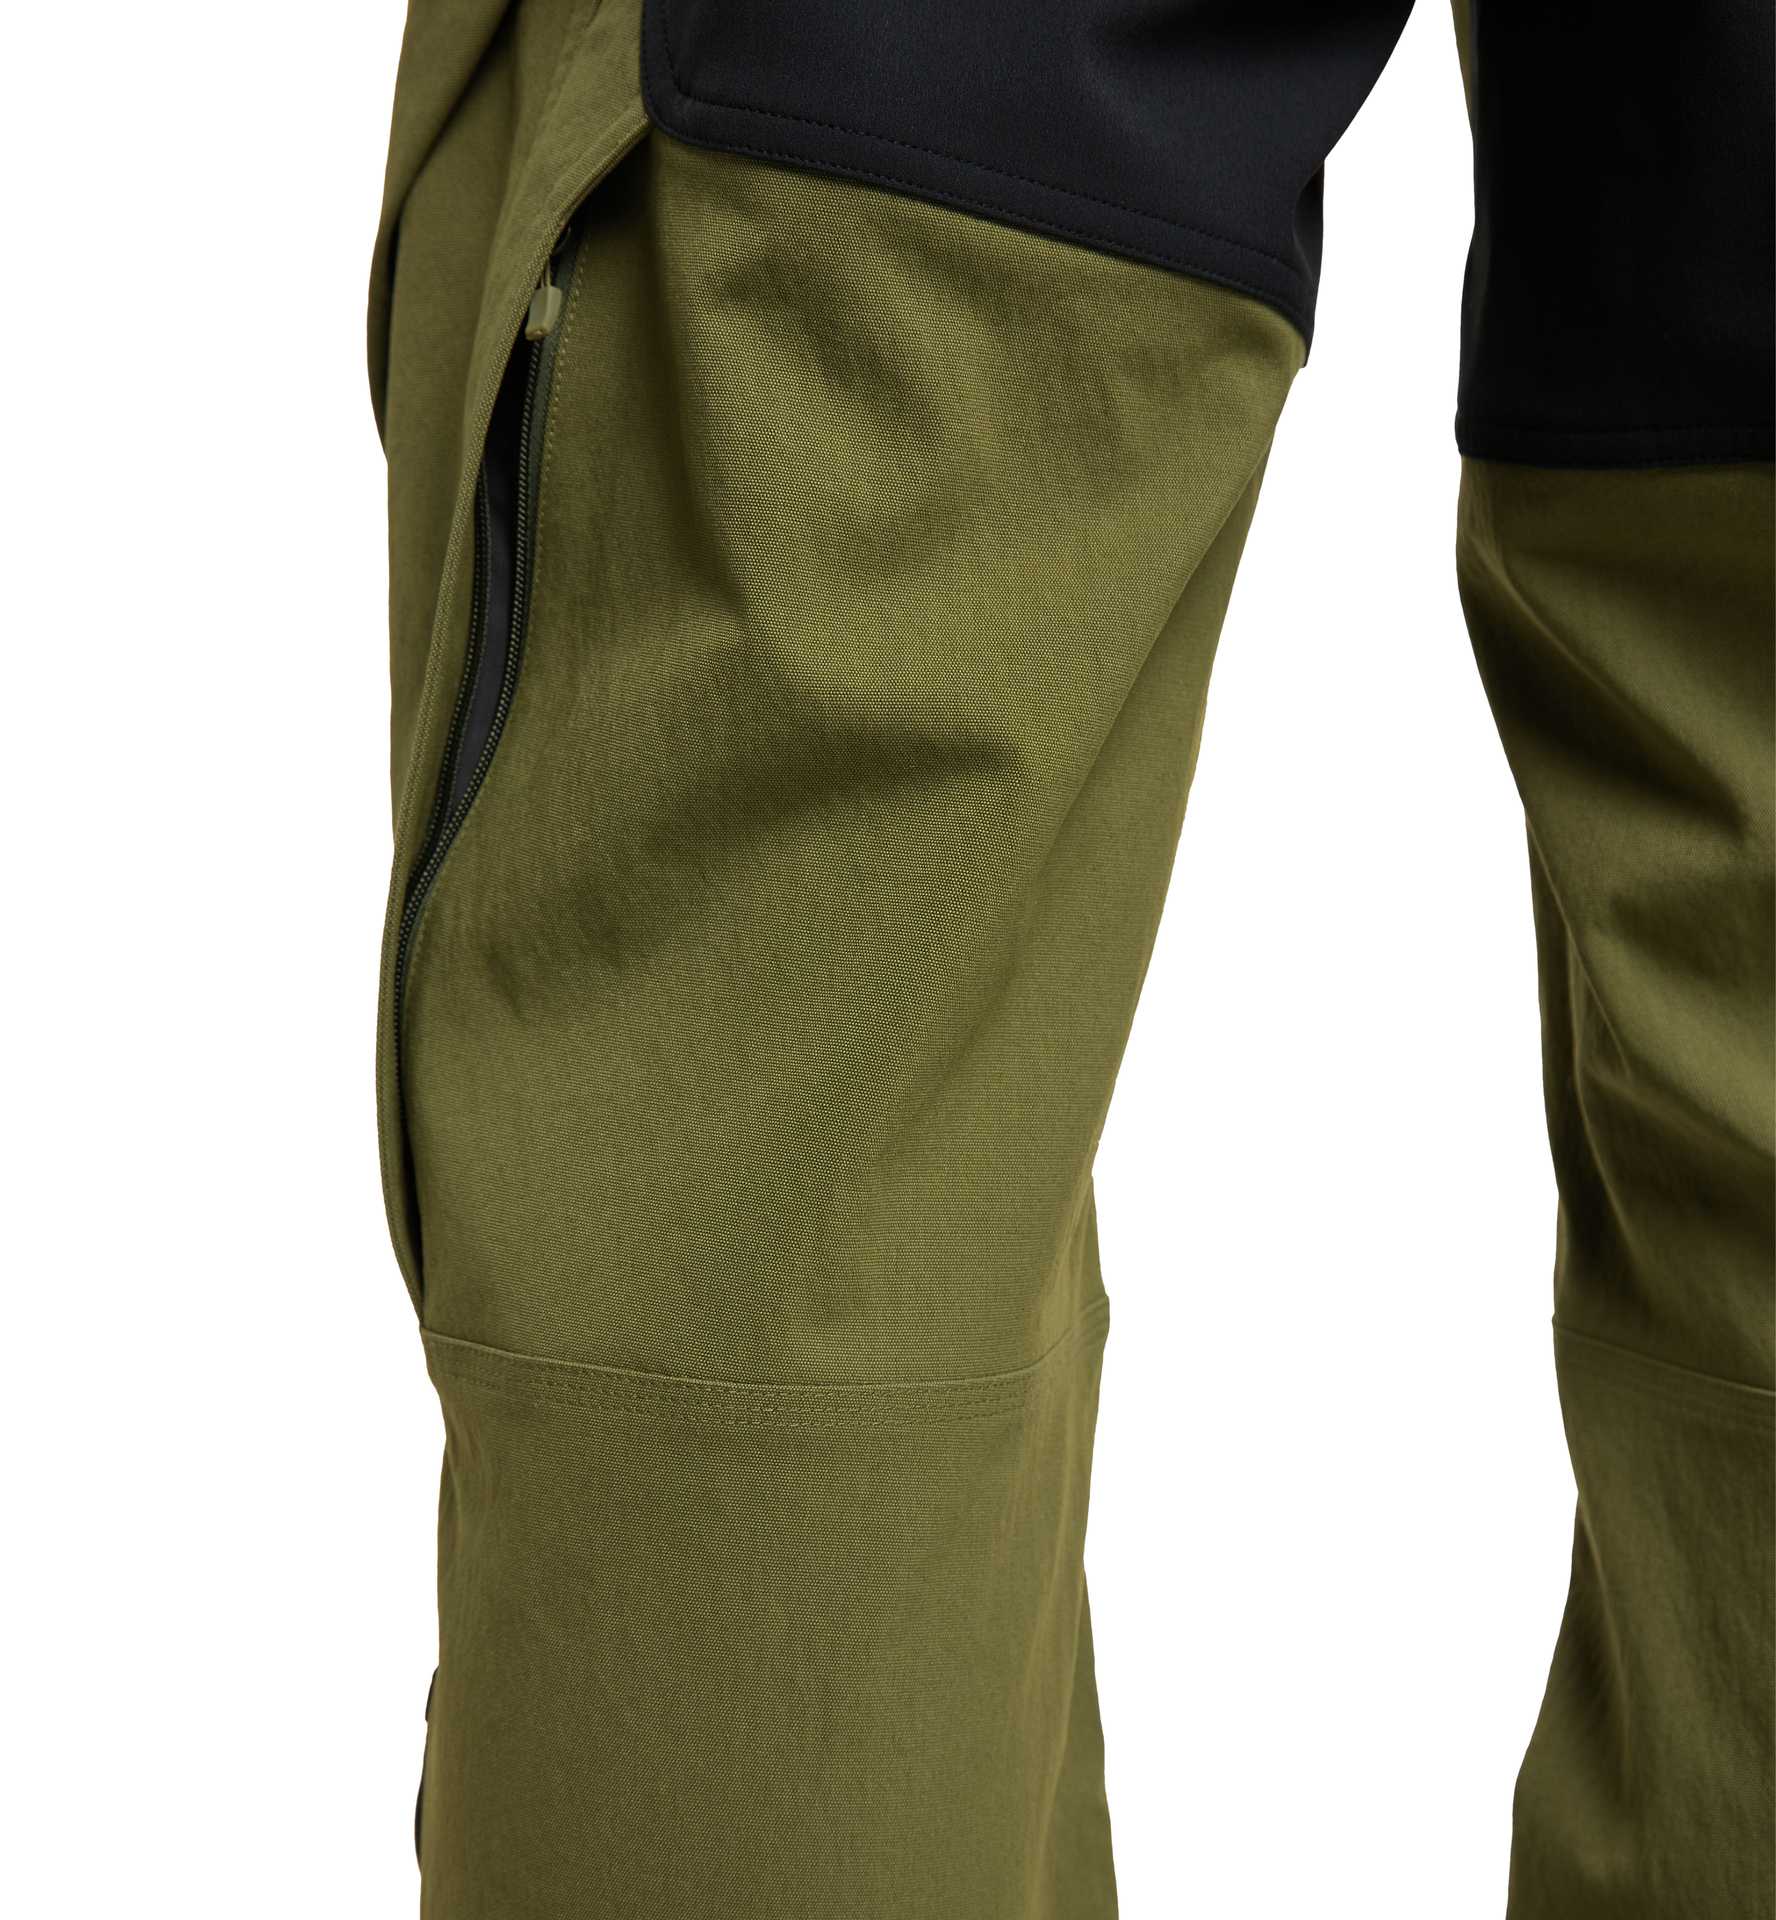 Buy blackberrys Mens Solid Cotton Slim Fit Trousers Green at Amazonin